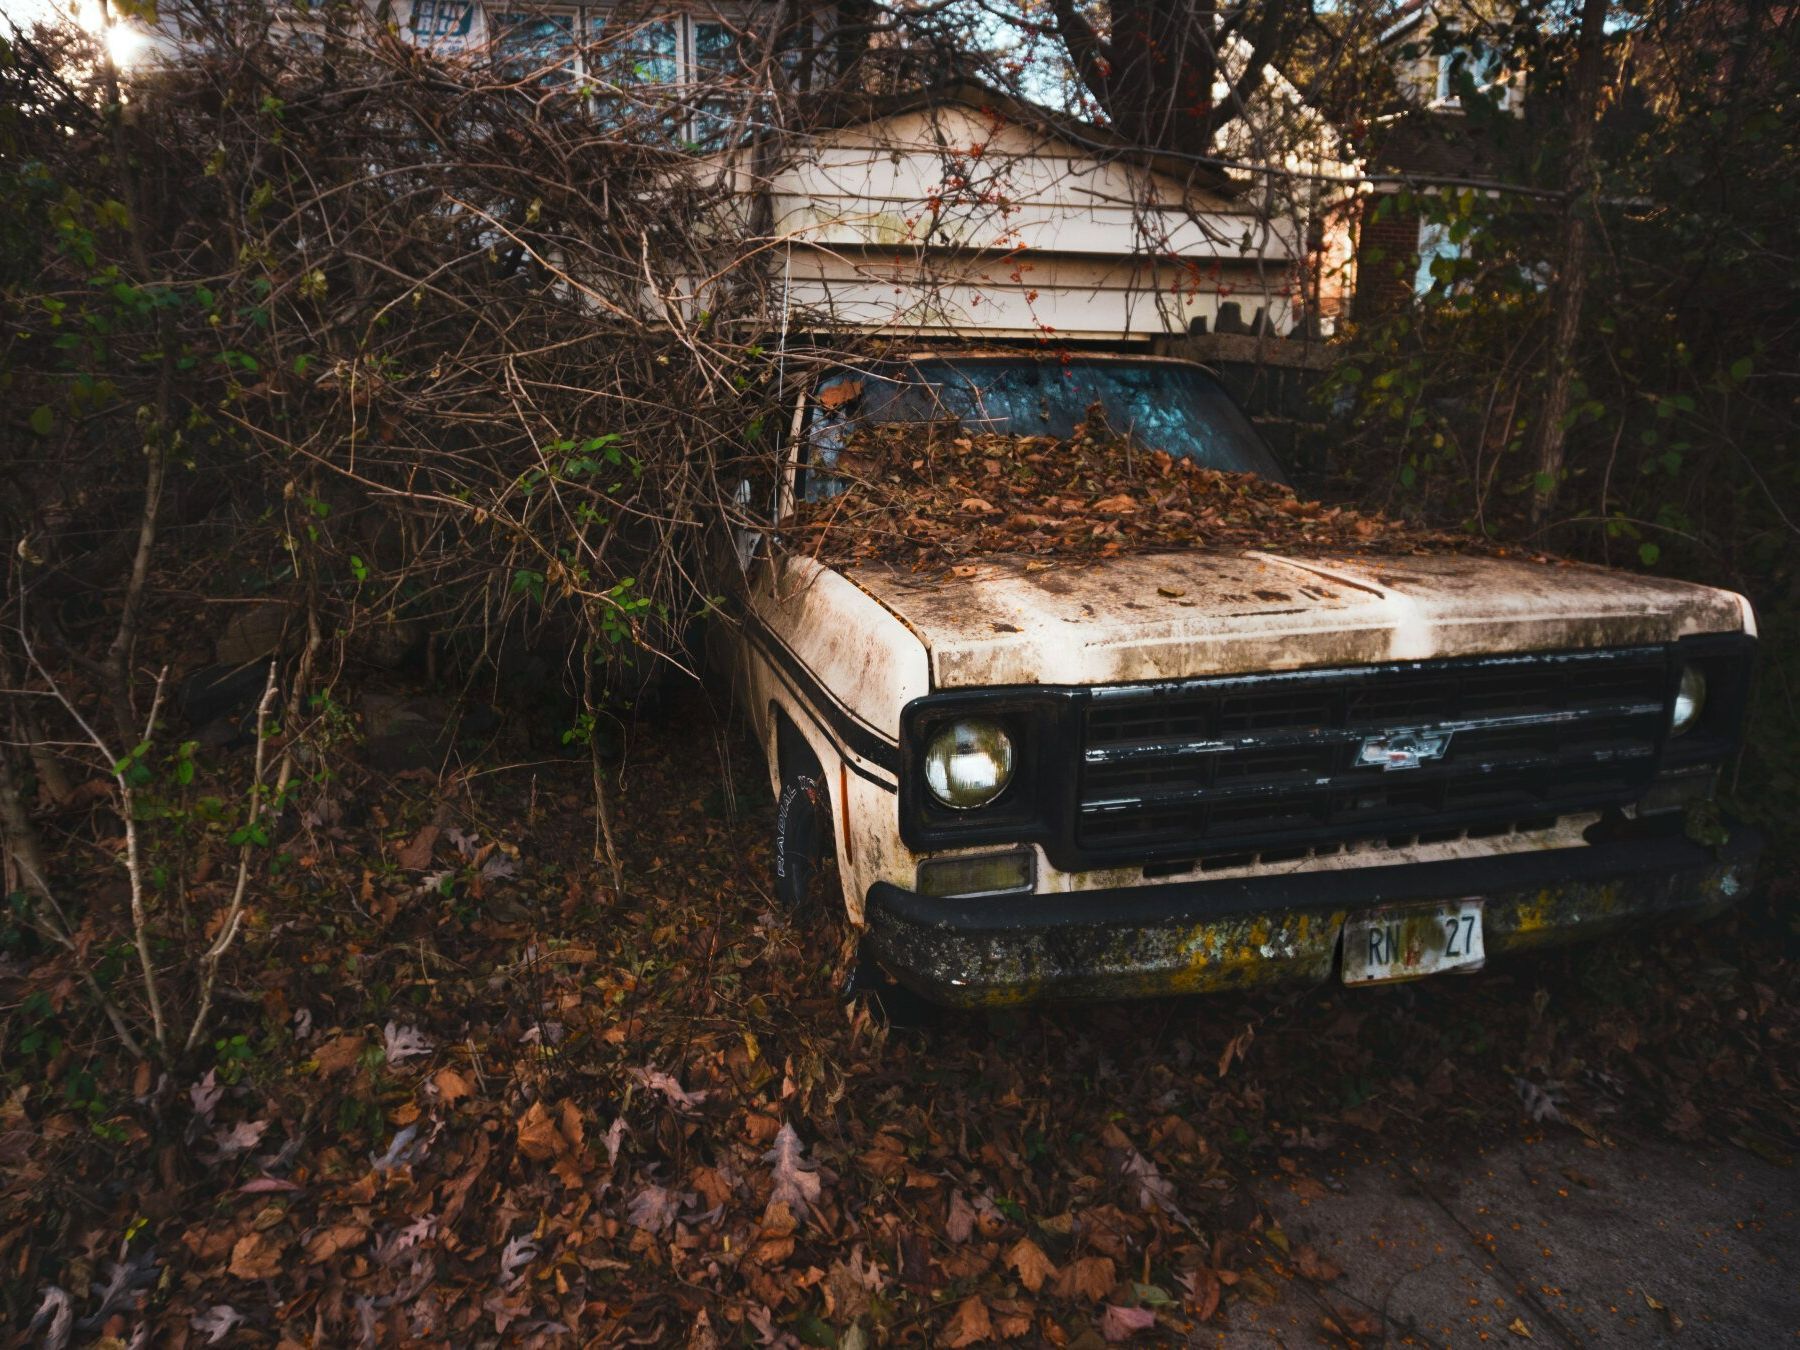 An old truck is covered in leaves in a yard.